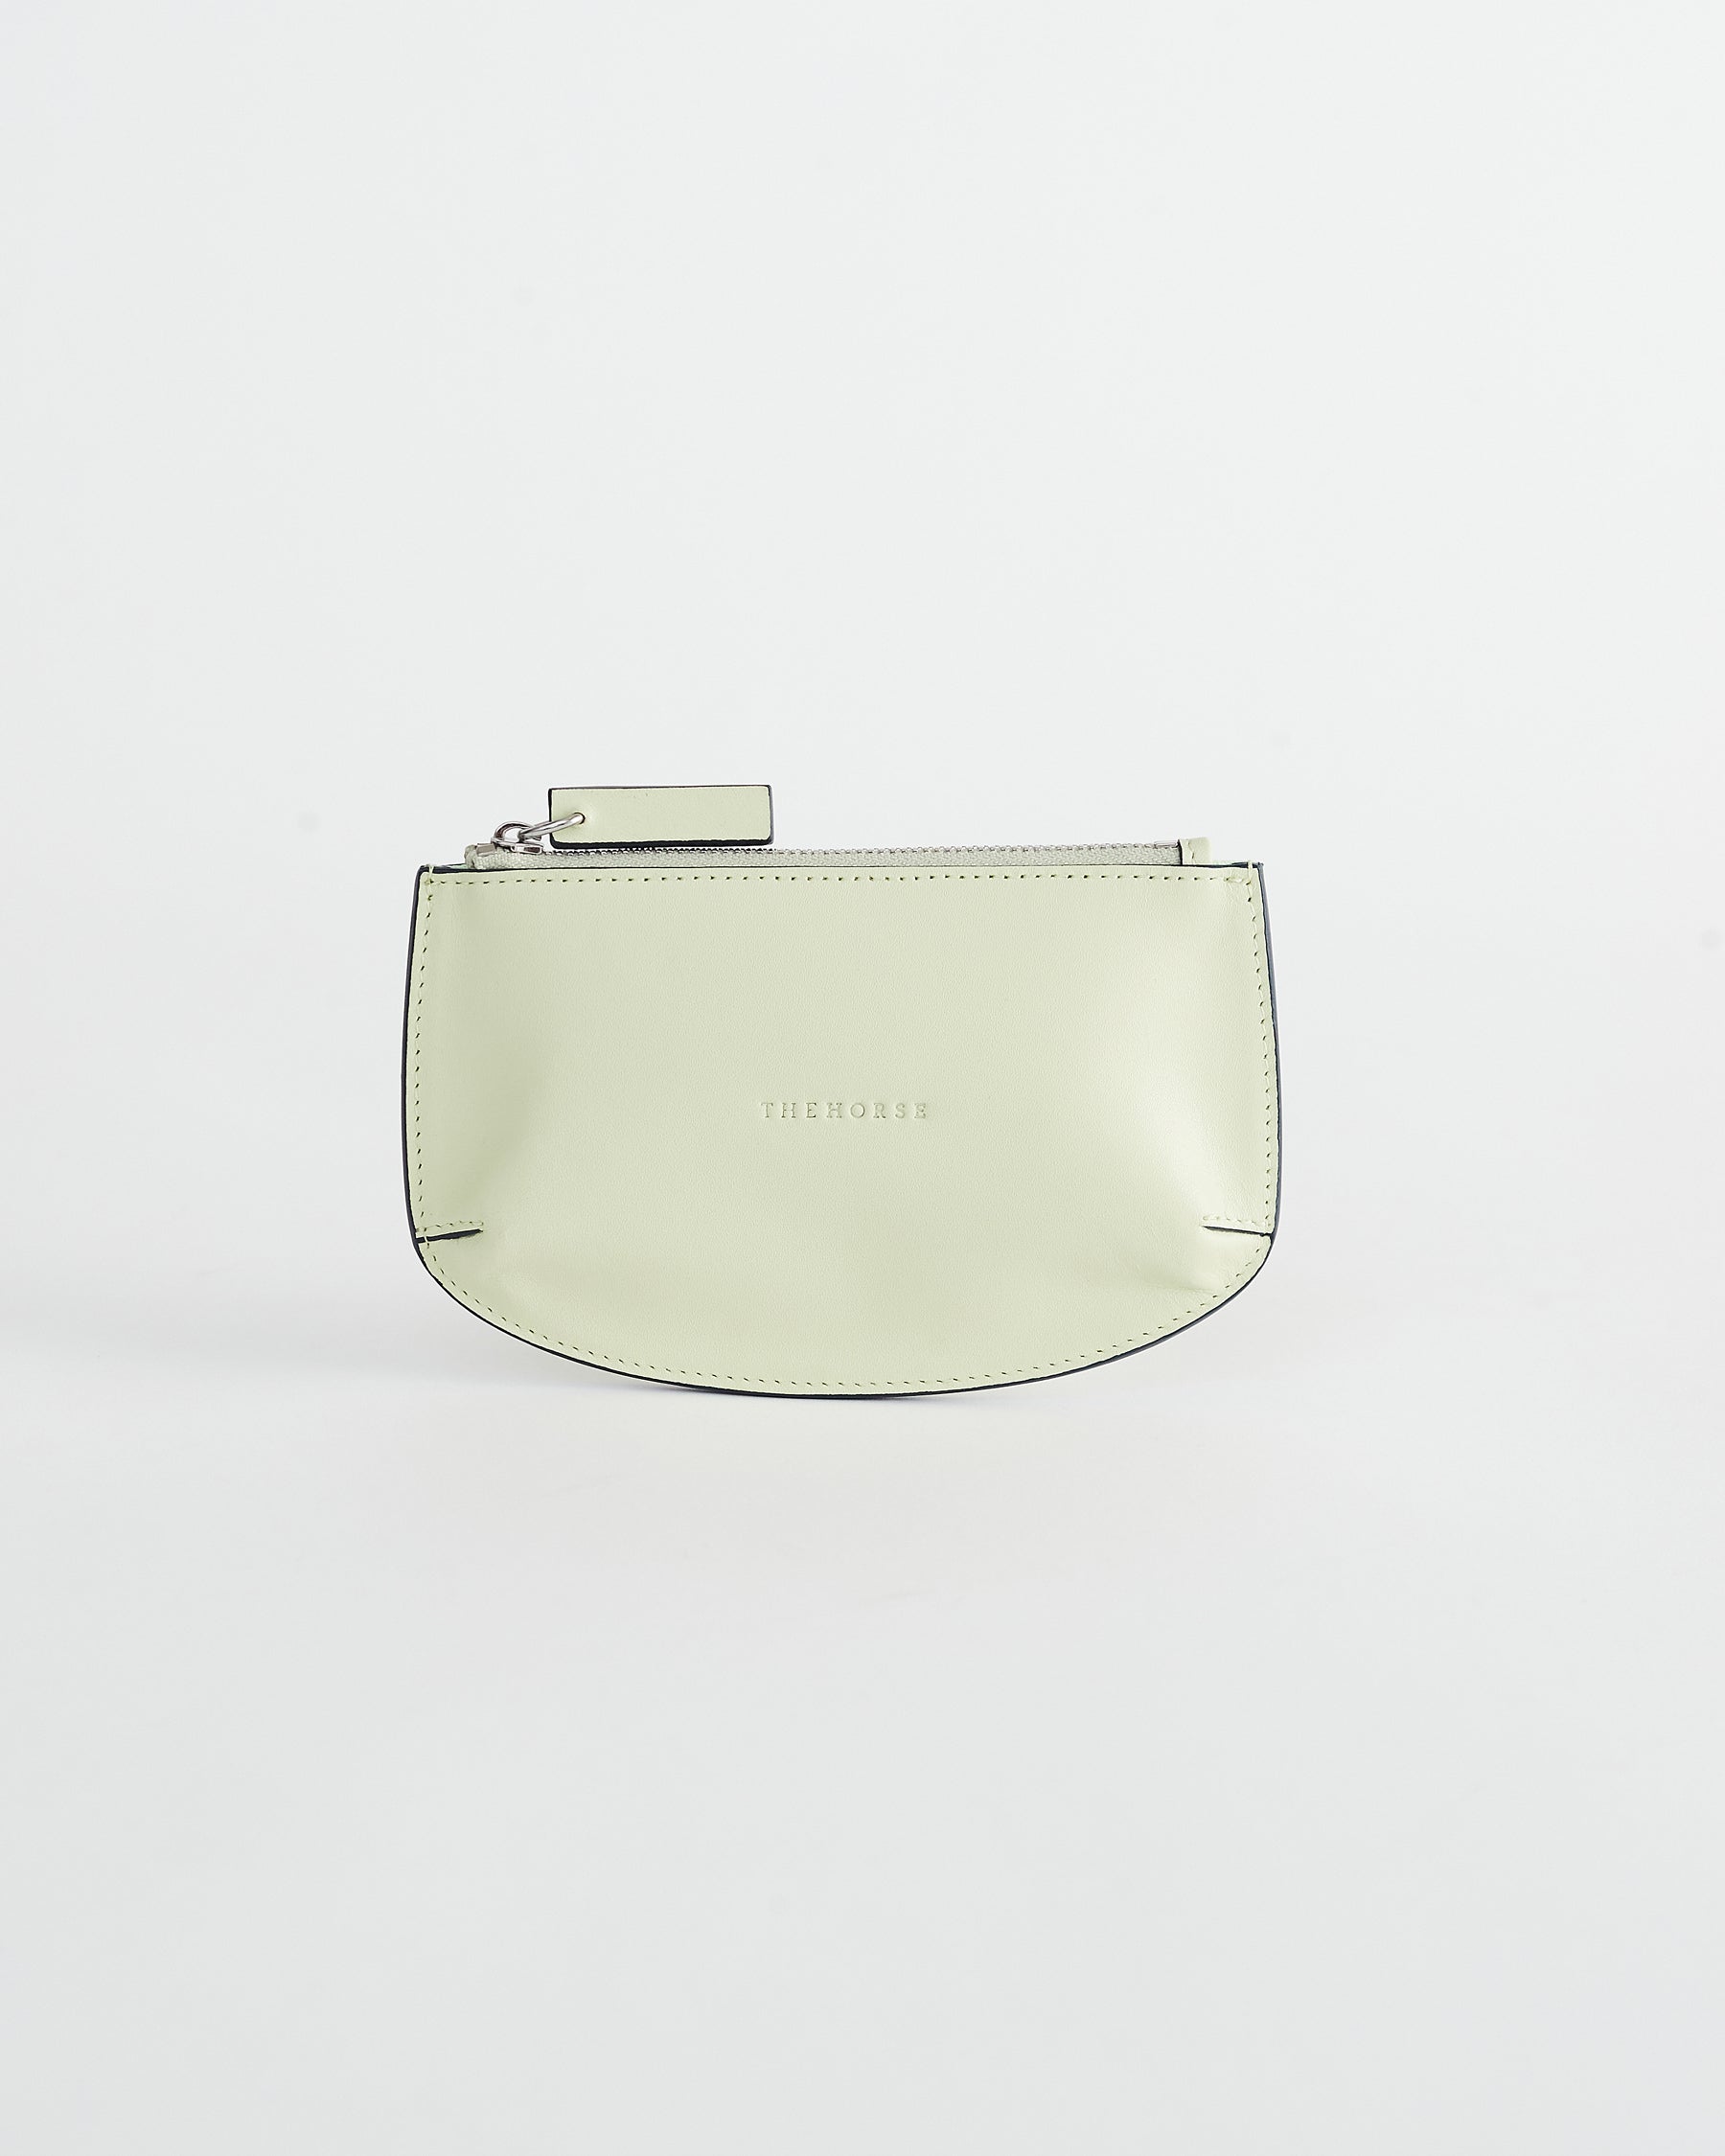 The Drew Women's Leather Zip Cardholder in Pale Pistachio by The Horse®